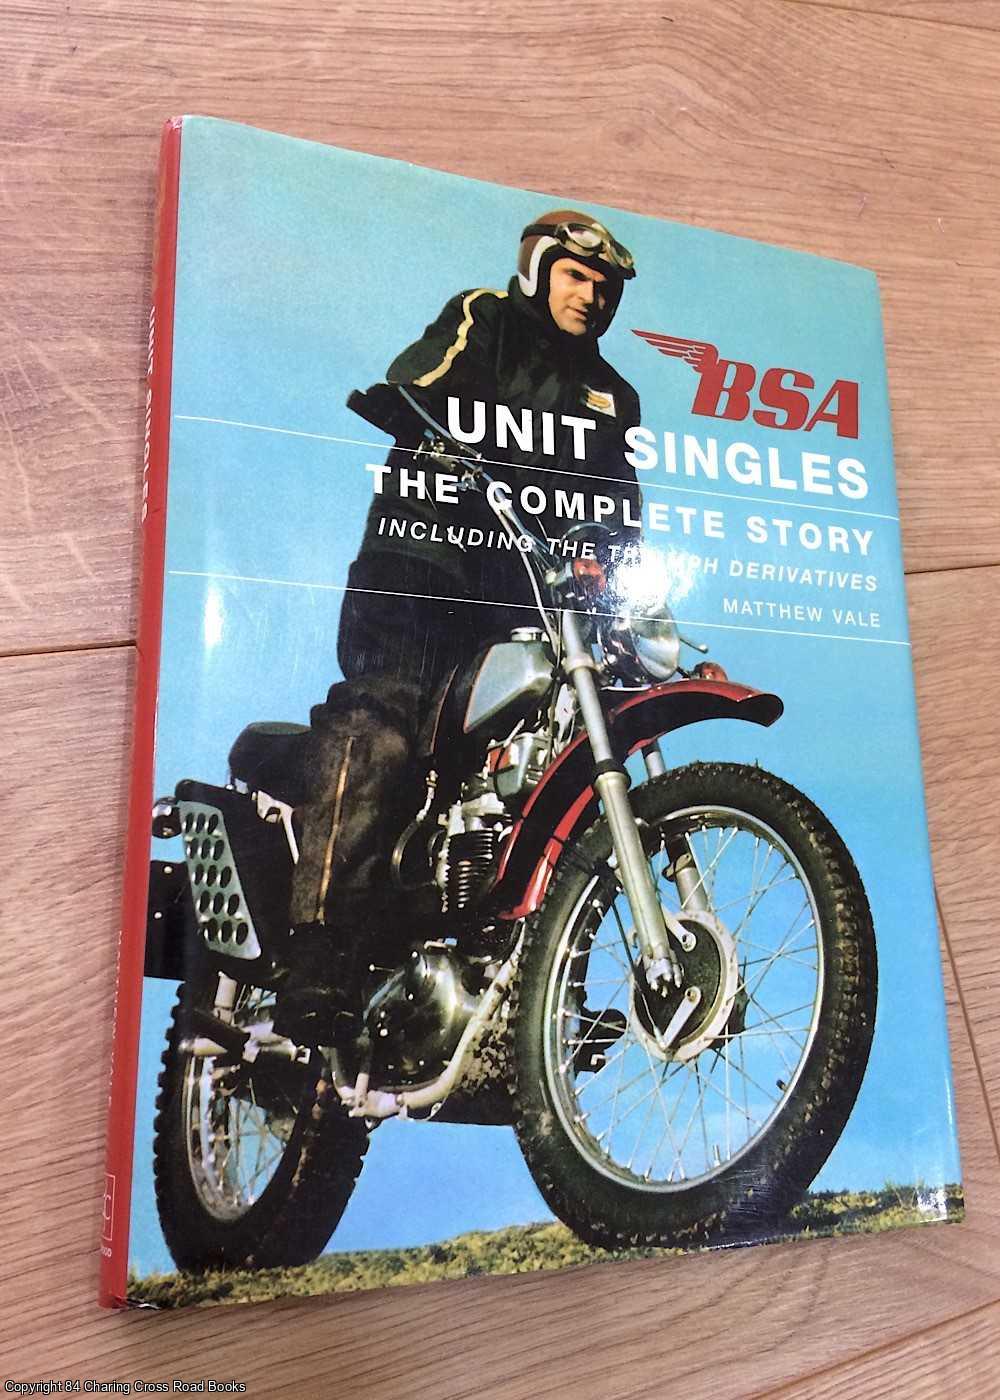 Vale, Matthew - BSA Unit Singles: The Complete Story Including the Triumph Derivatives